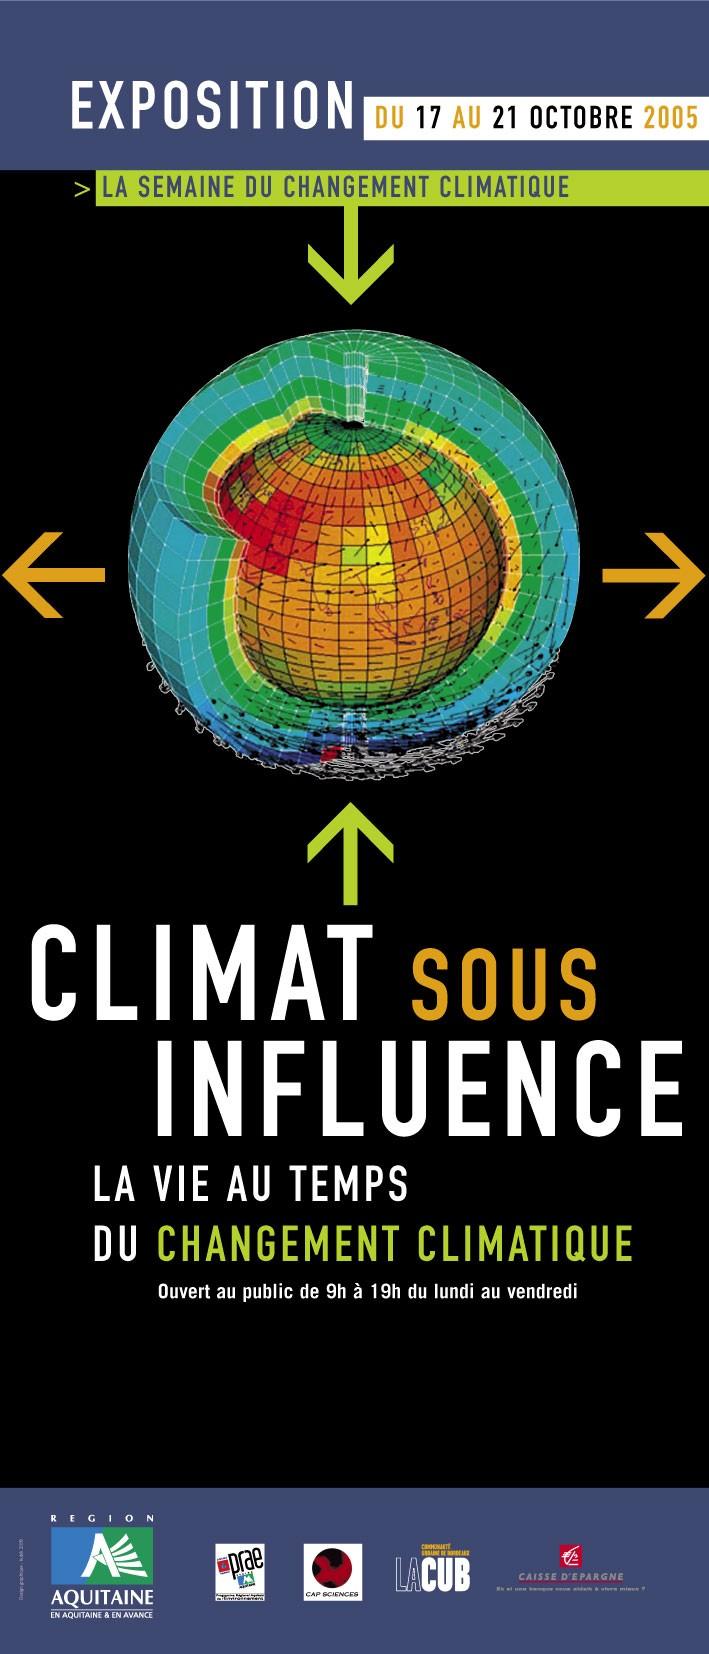 Birth of «Clim Way» Cap Sciences' experience: - in the subject : Exhibition «Climat sous Influence» (Climate under